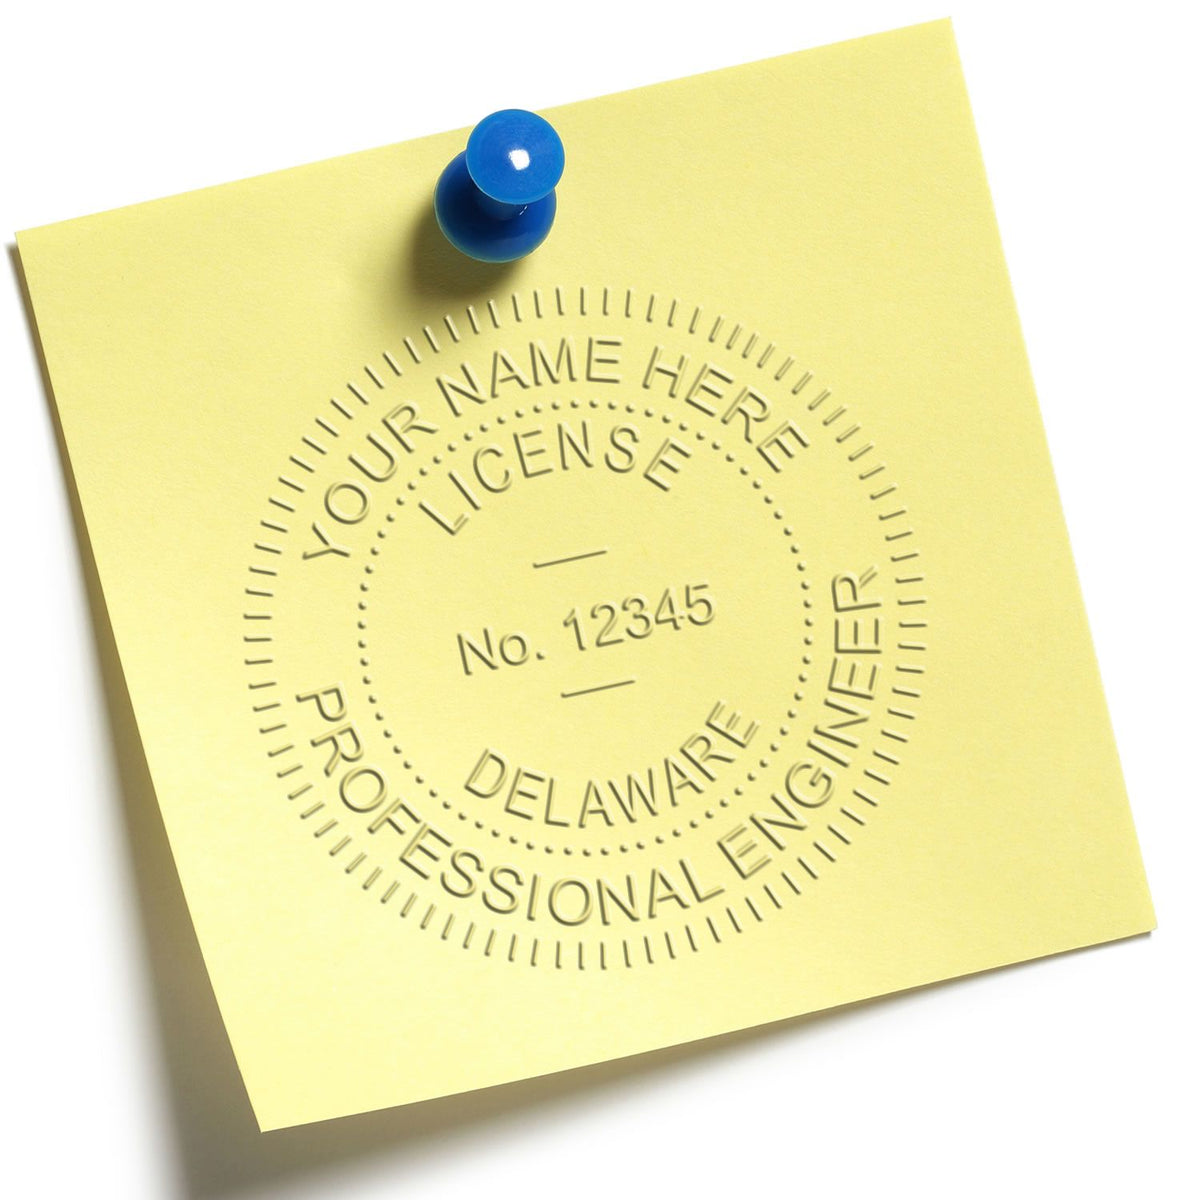 An in use photo of the Gift Delaware Engineer Seal showing a sample imprint on a cardstock